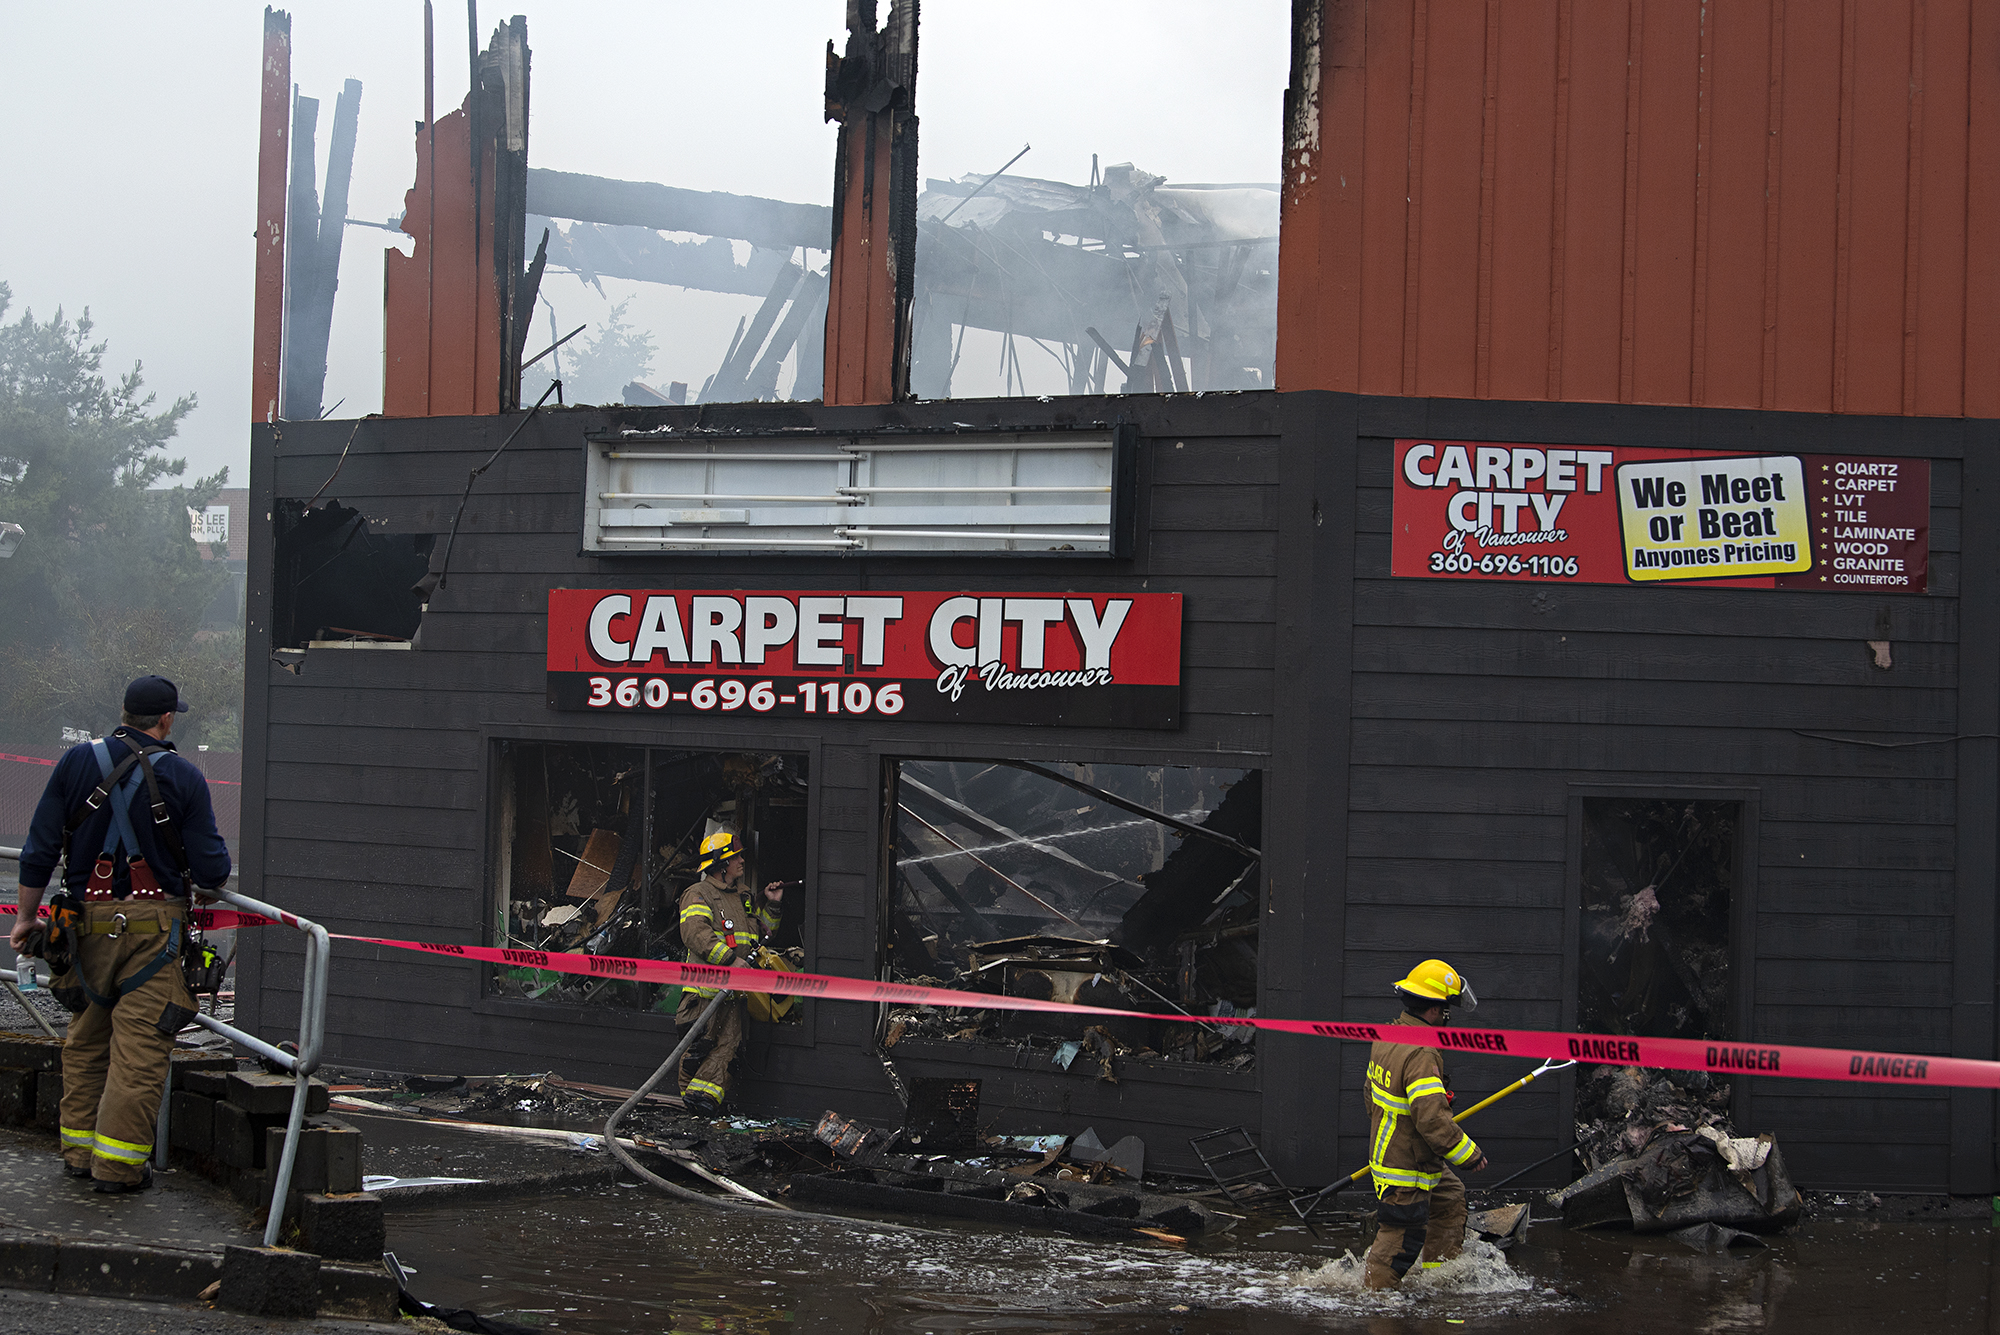 Firefighters work at the scene as a two alarm fire heavily damages a building at the Interstate Business Center in Hazel Dell on Wednesday morning, May 25, 2022. Carpet City, Phoenix Protection and Styles Unlimited were among the businesses destroyed in the early morning blaze at 9013 N.E. Highway 99, north of Vancouver city limits. No injuries were reported.